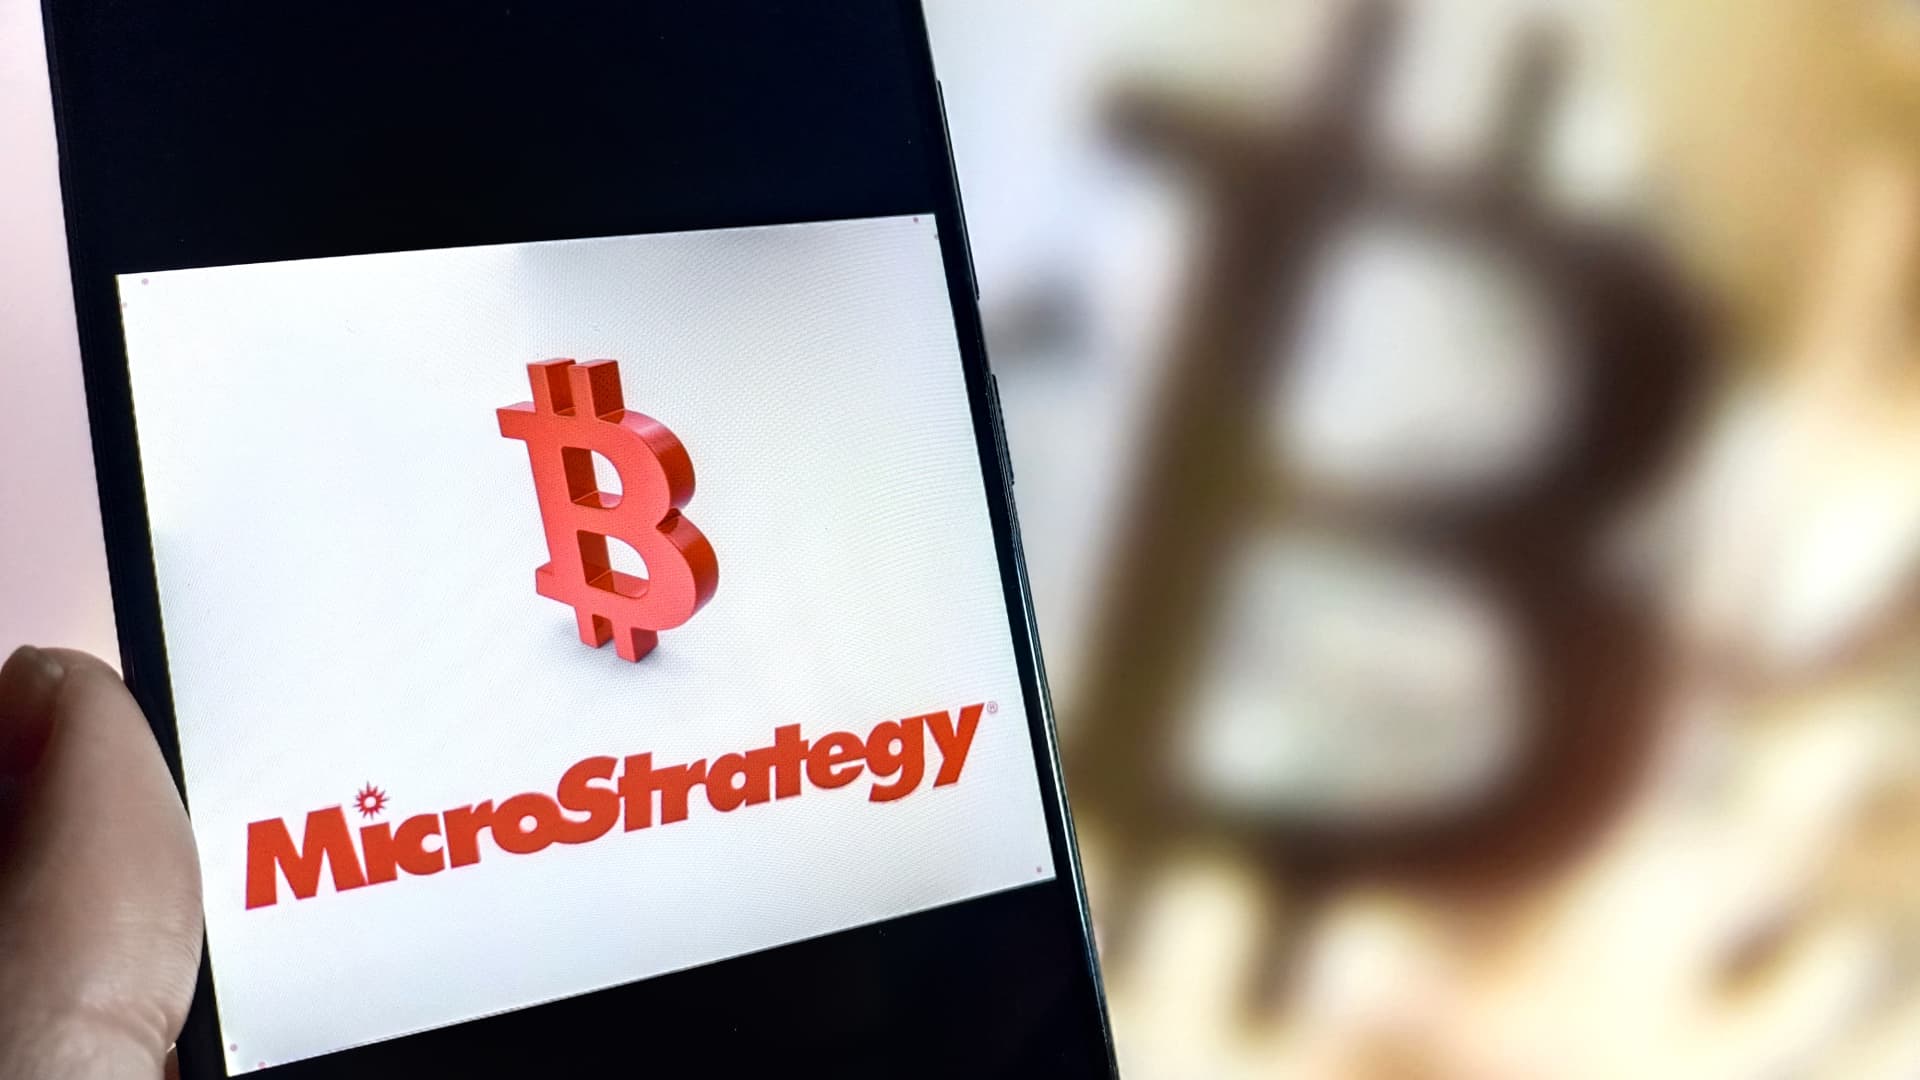 MicroStrategy sets 10-for-1 stock split four months after bitcoin peak